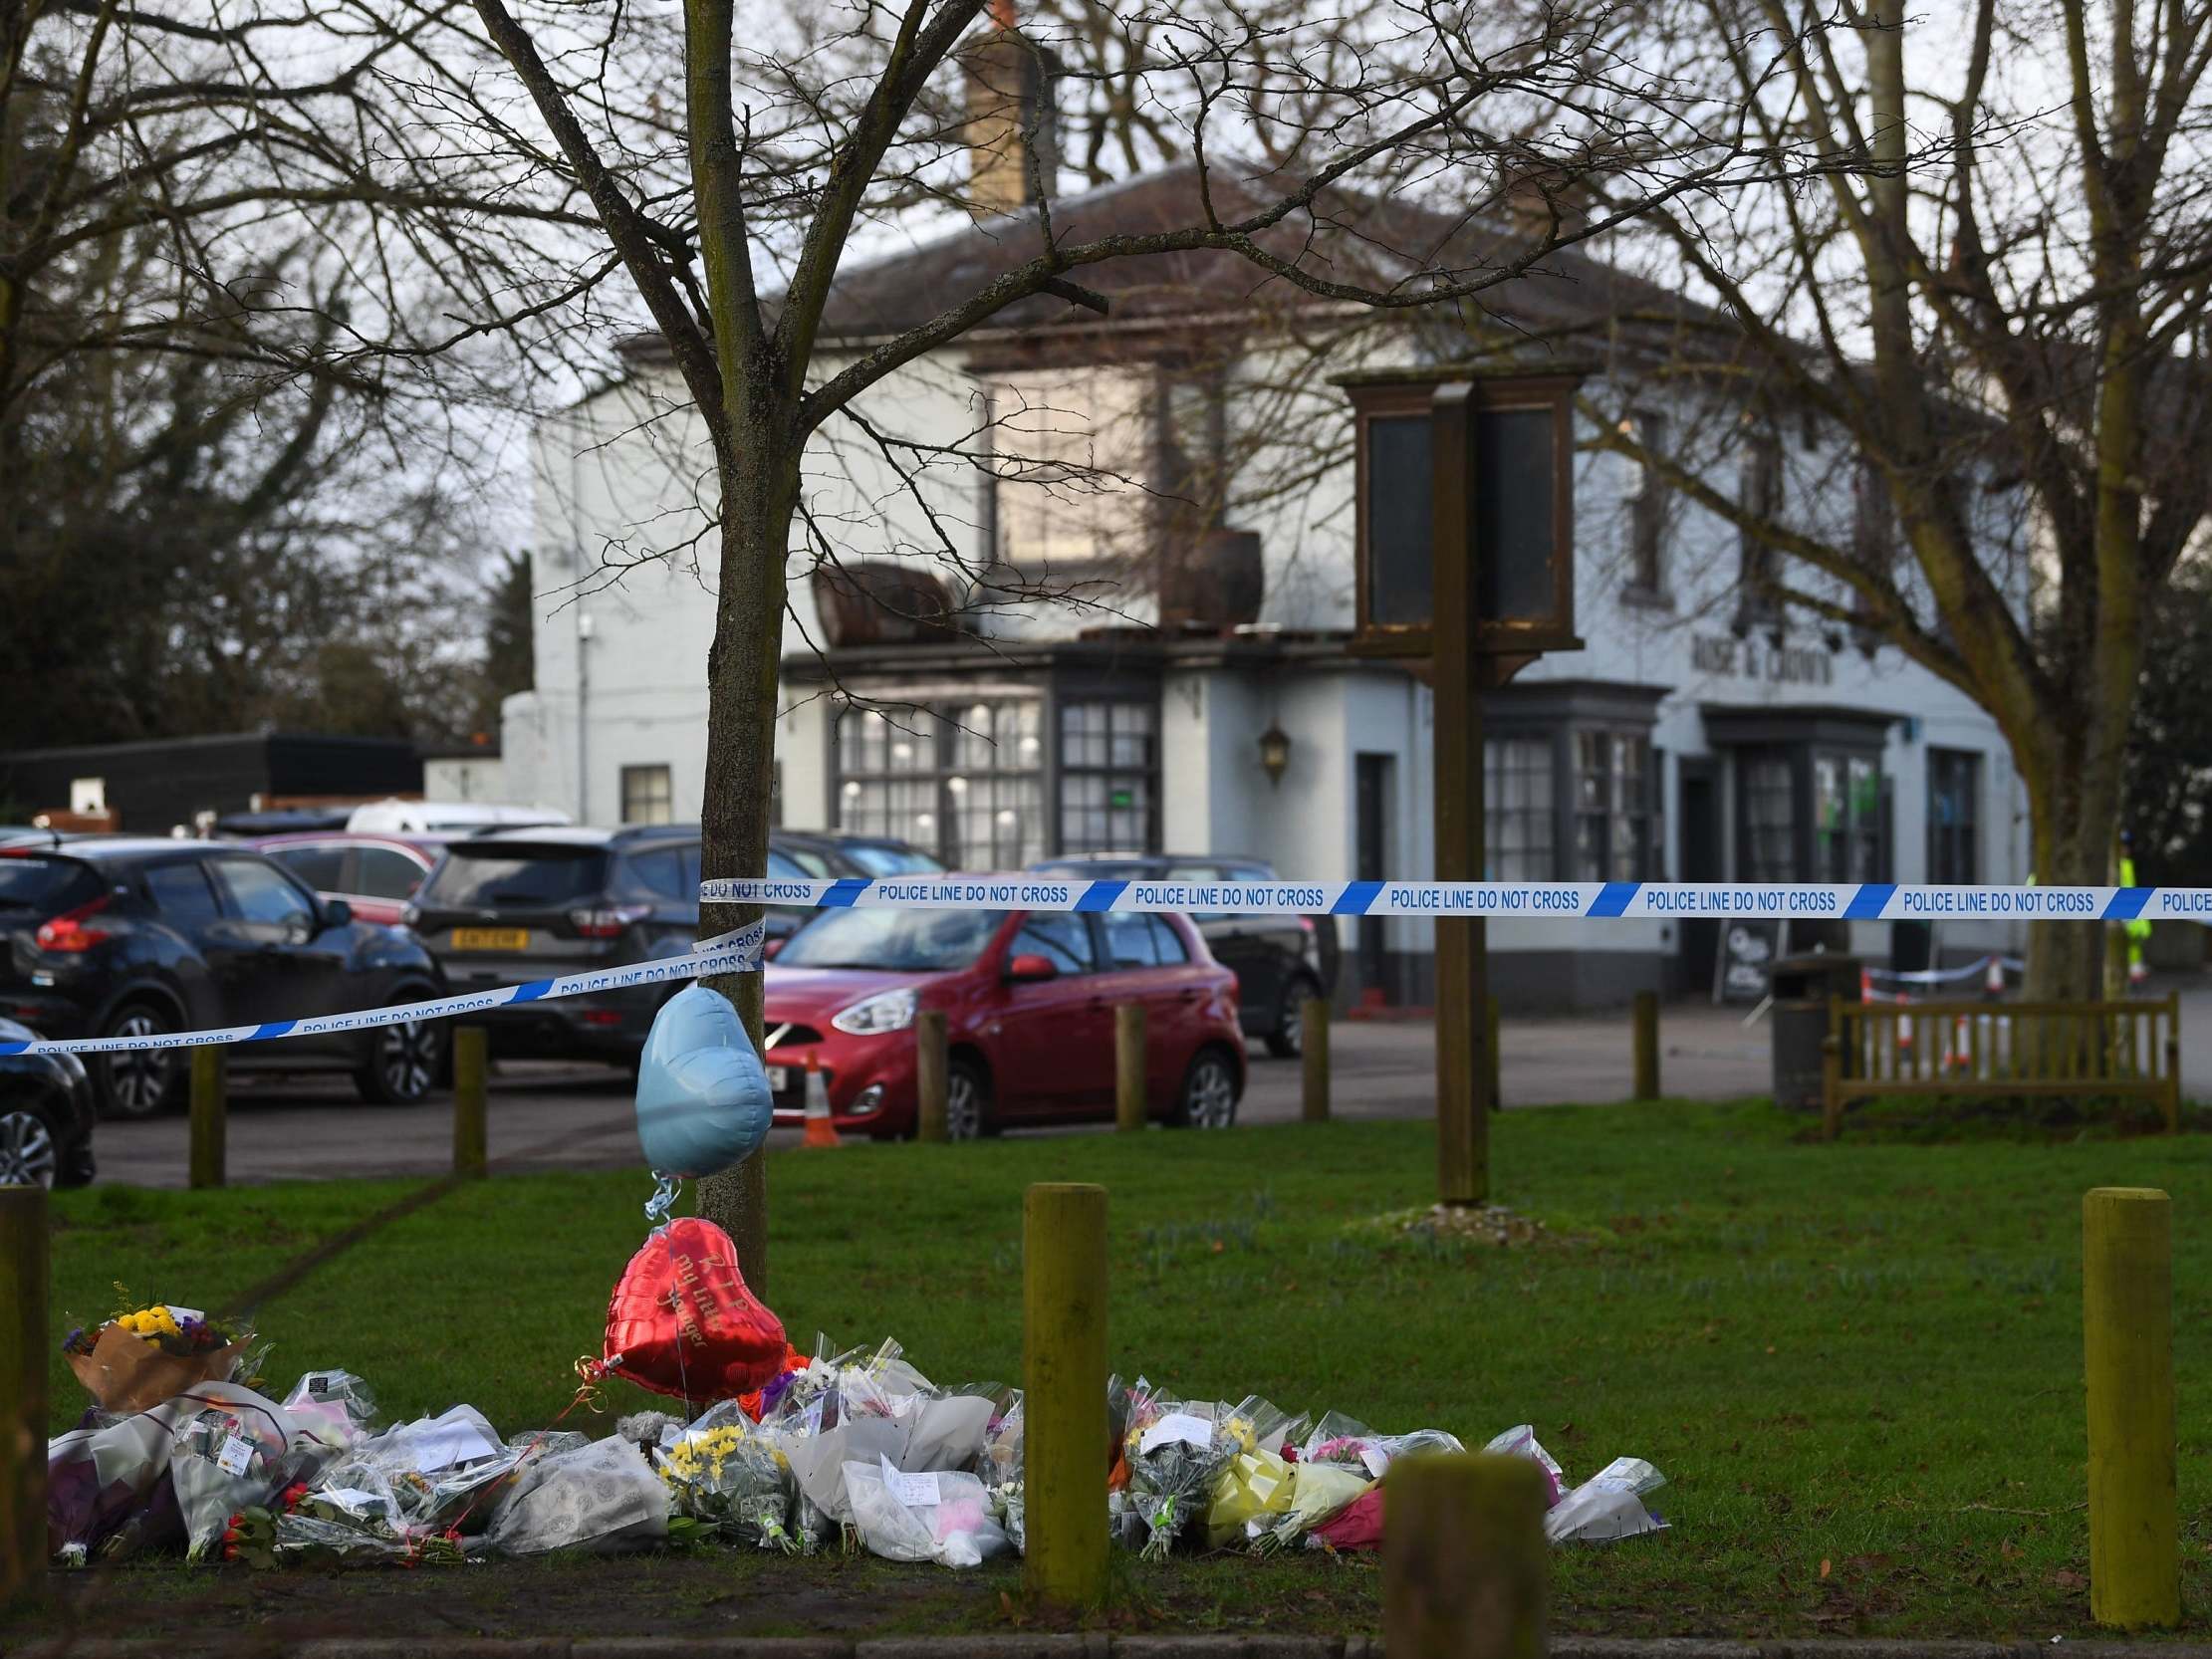 Flowers left near to the scene where a man, named locally as Liam Taylor 19, died after being stabbed outside the Rose and Crown pub in Writtle, Essex, on 31 January, 2020.